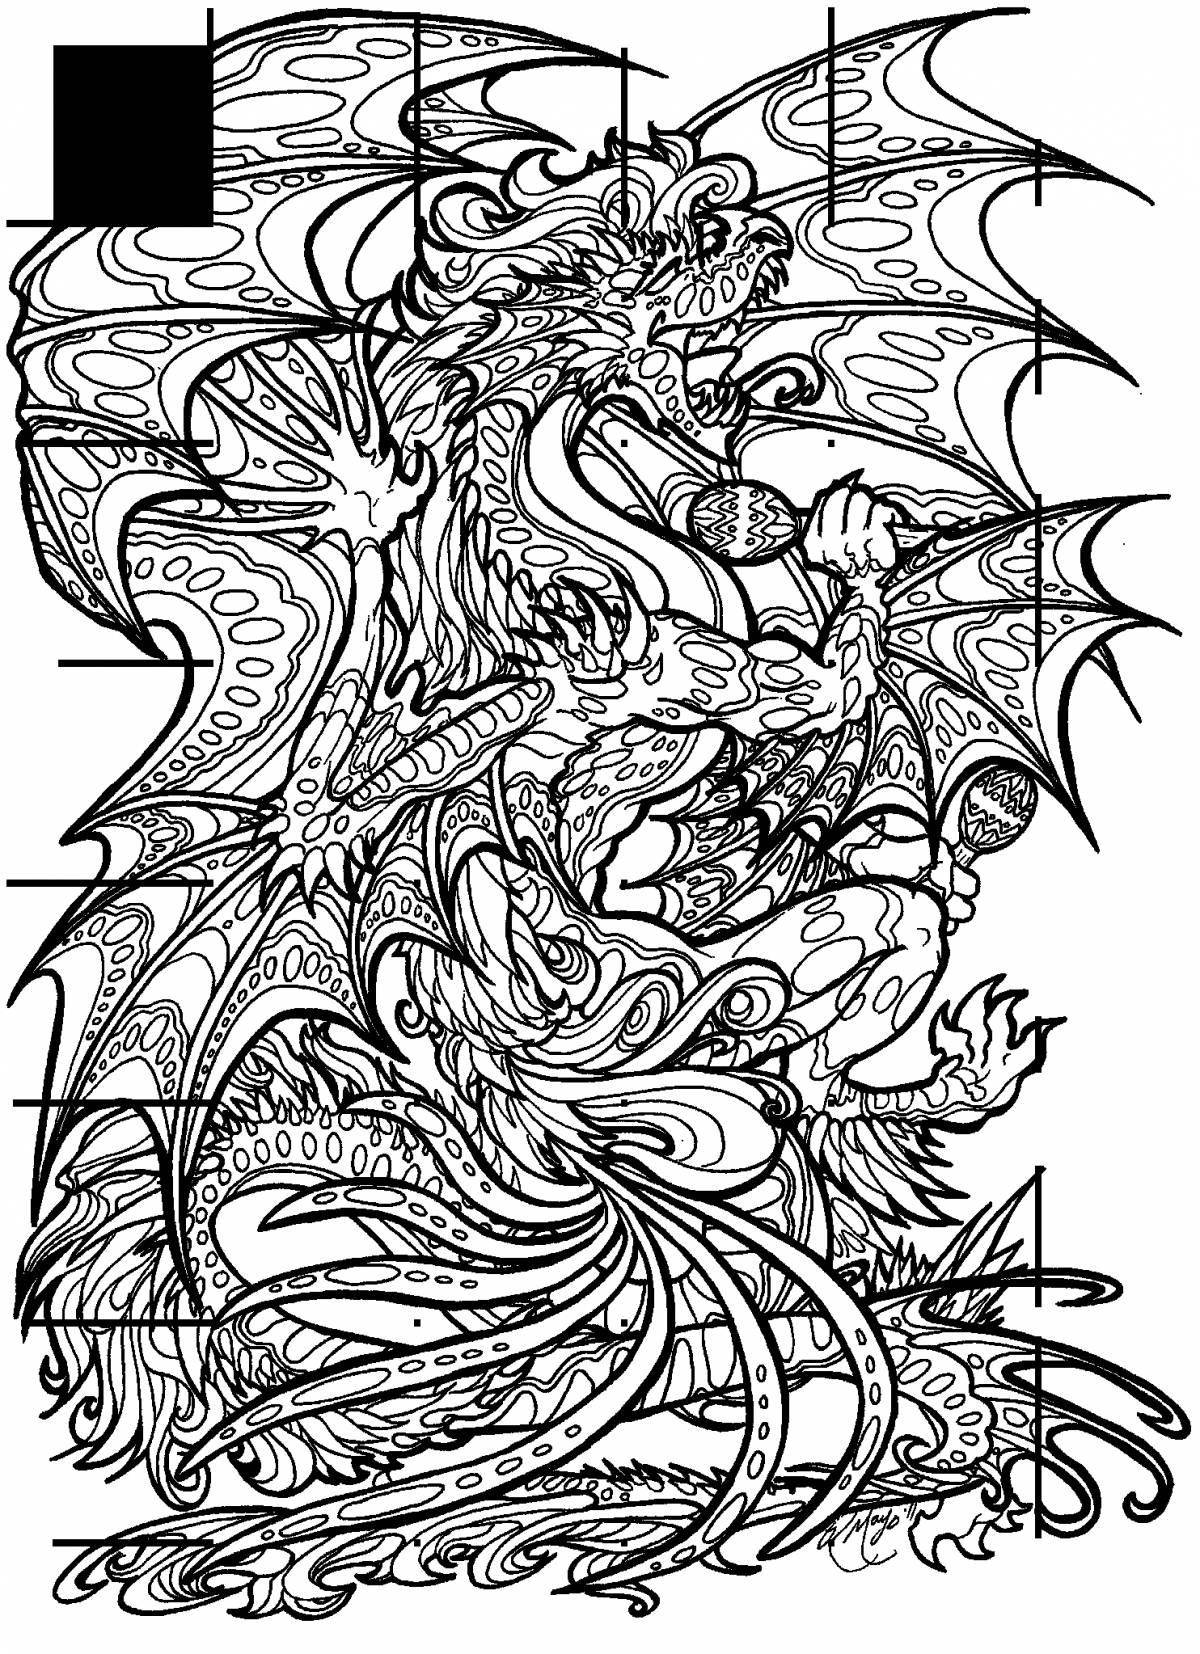 Wonderful when dragons dream coloring page